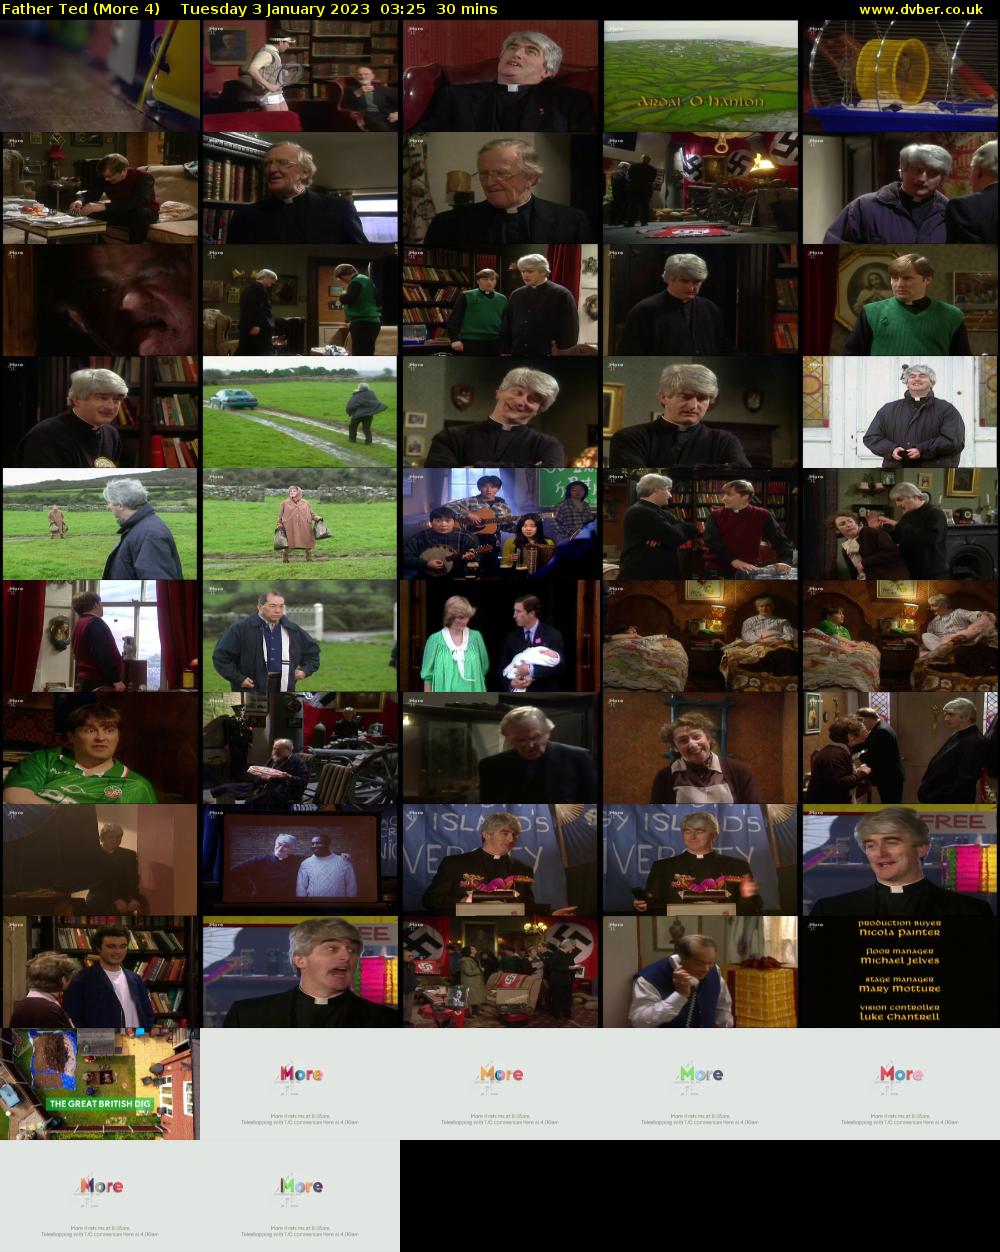 Father Ted (More 4) Tuesday 3 January 2023 03:25 - 03:55